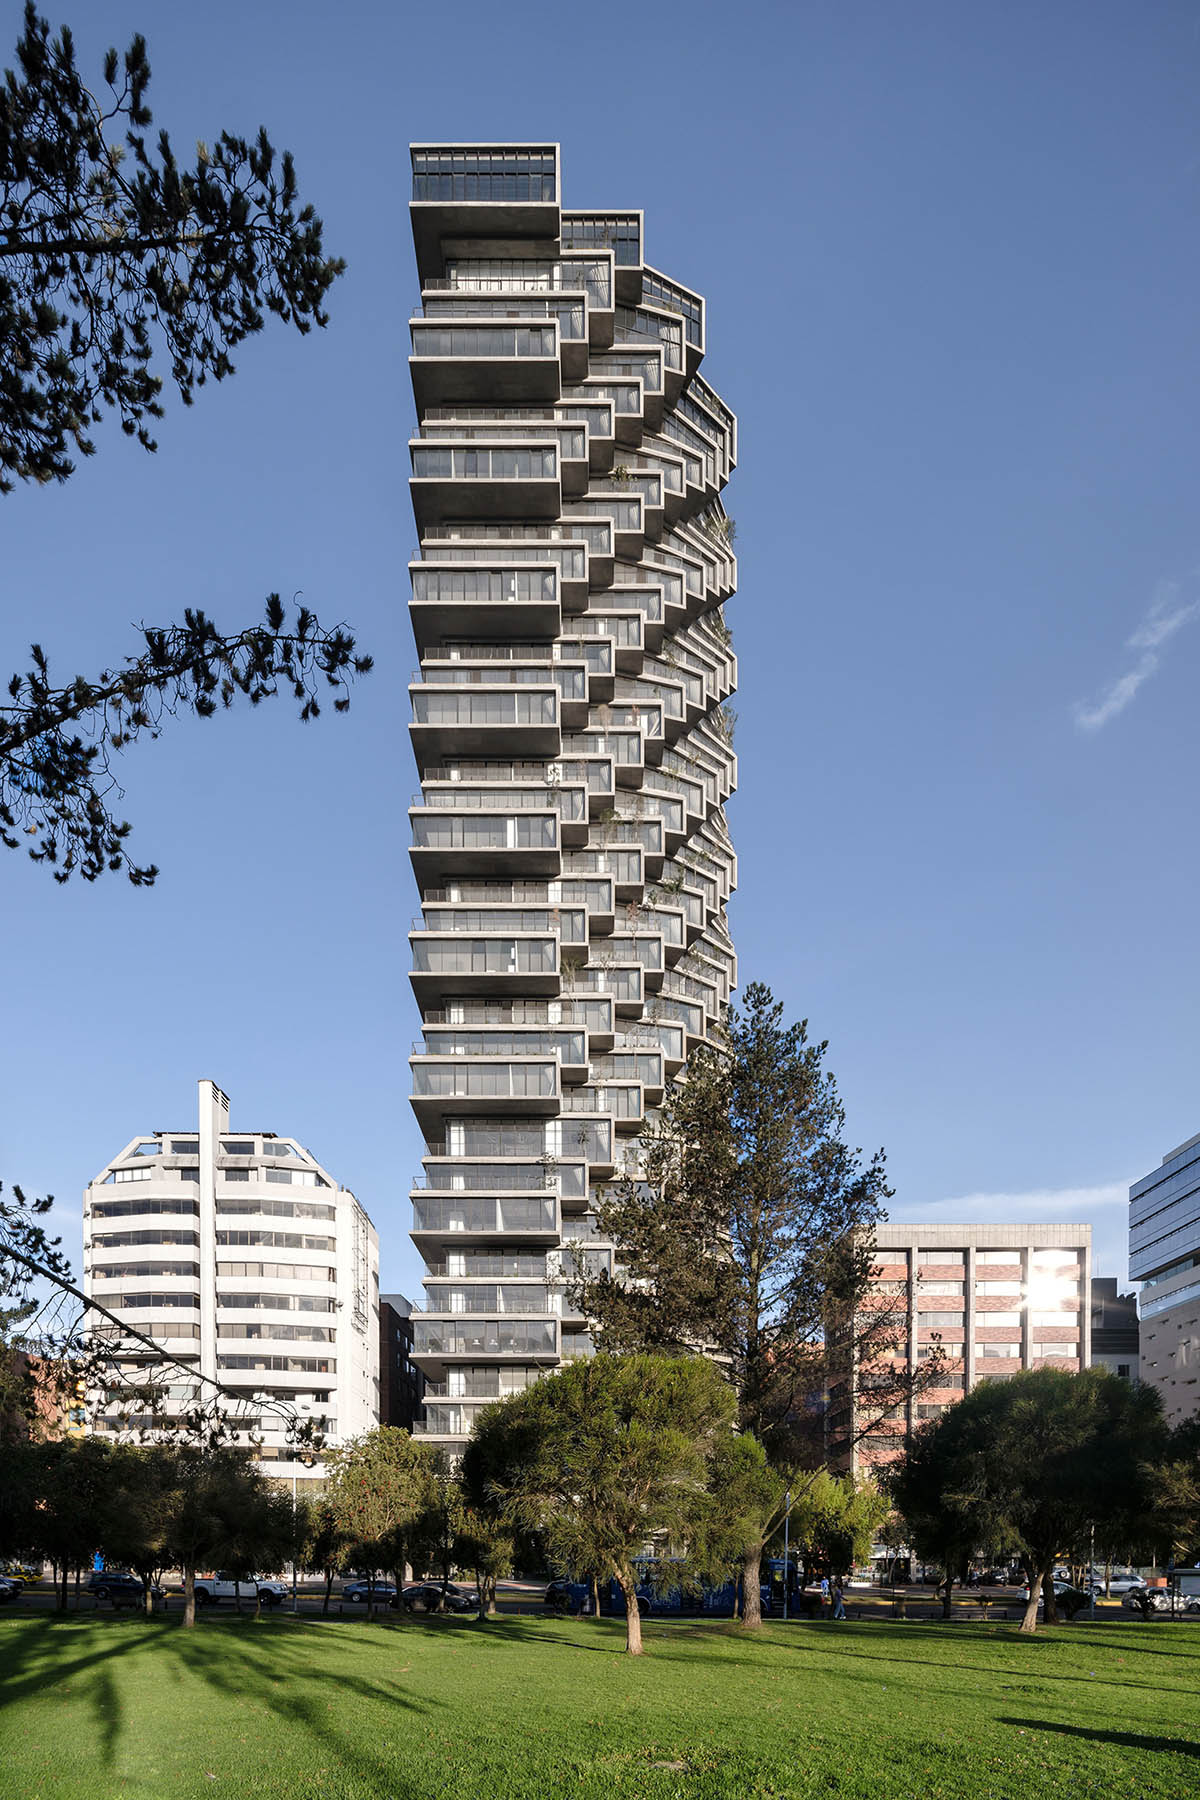 Rotated concrete residences form BIG's new residential tower in Quito 